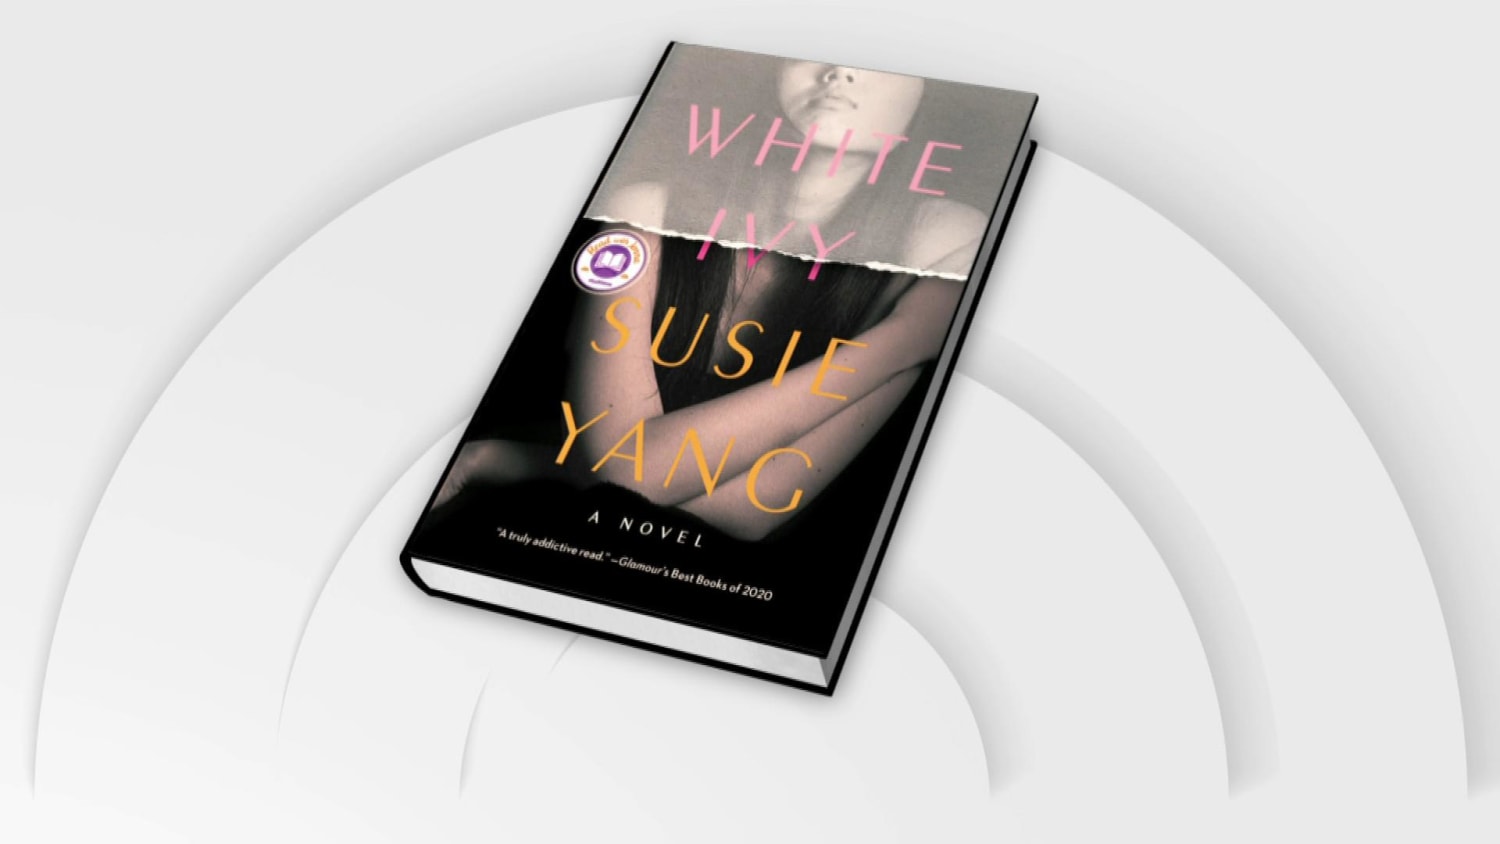 Susie Yang on Her Deliciously Twisty Debut Novel, WHITE IVY 